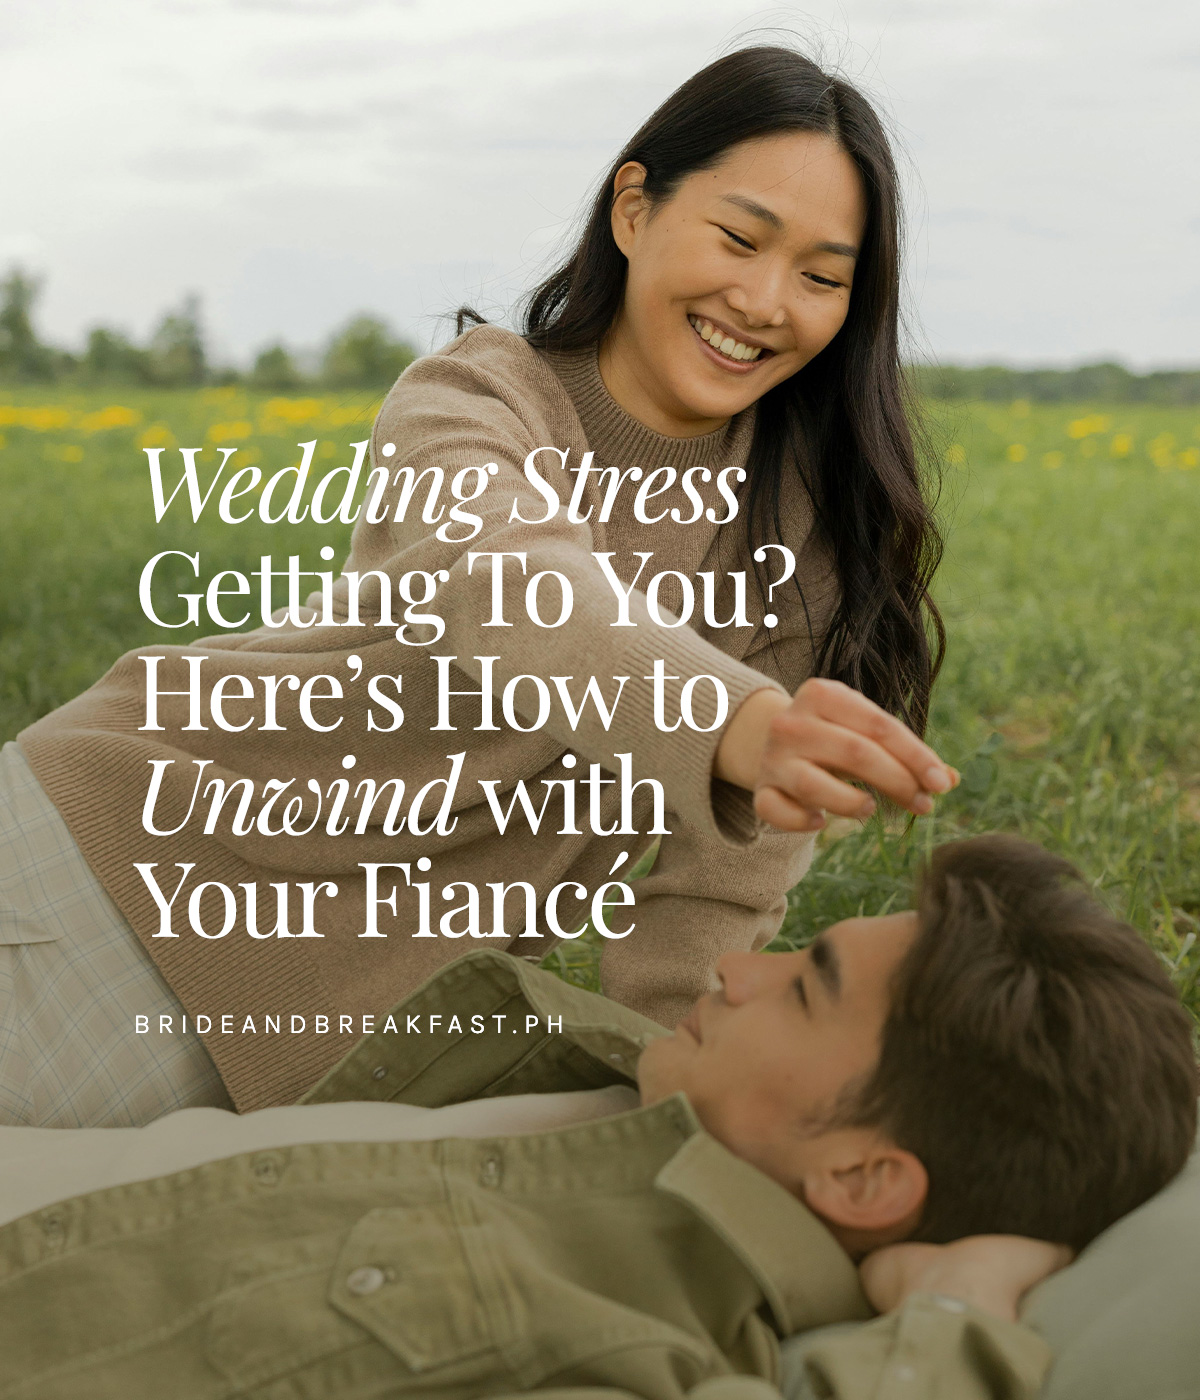 Wedding Stress Getting To You? Here's How to Unwind with Your Fiancé